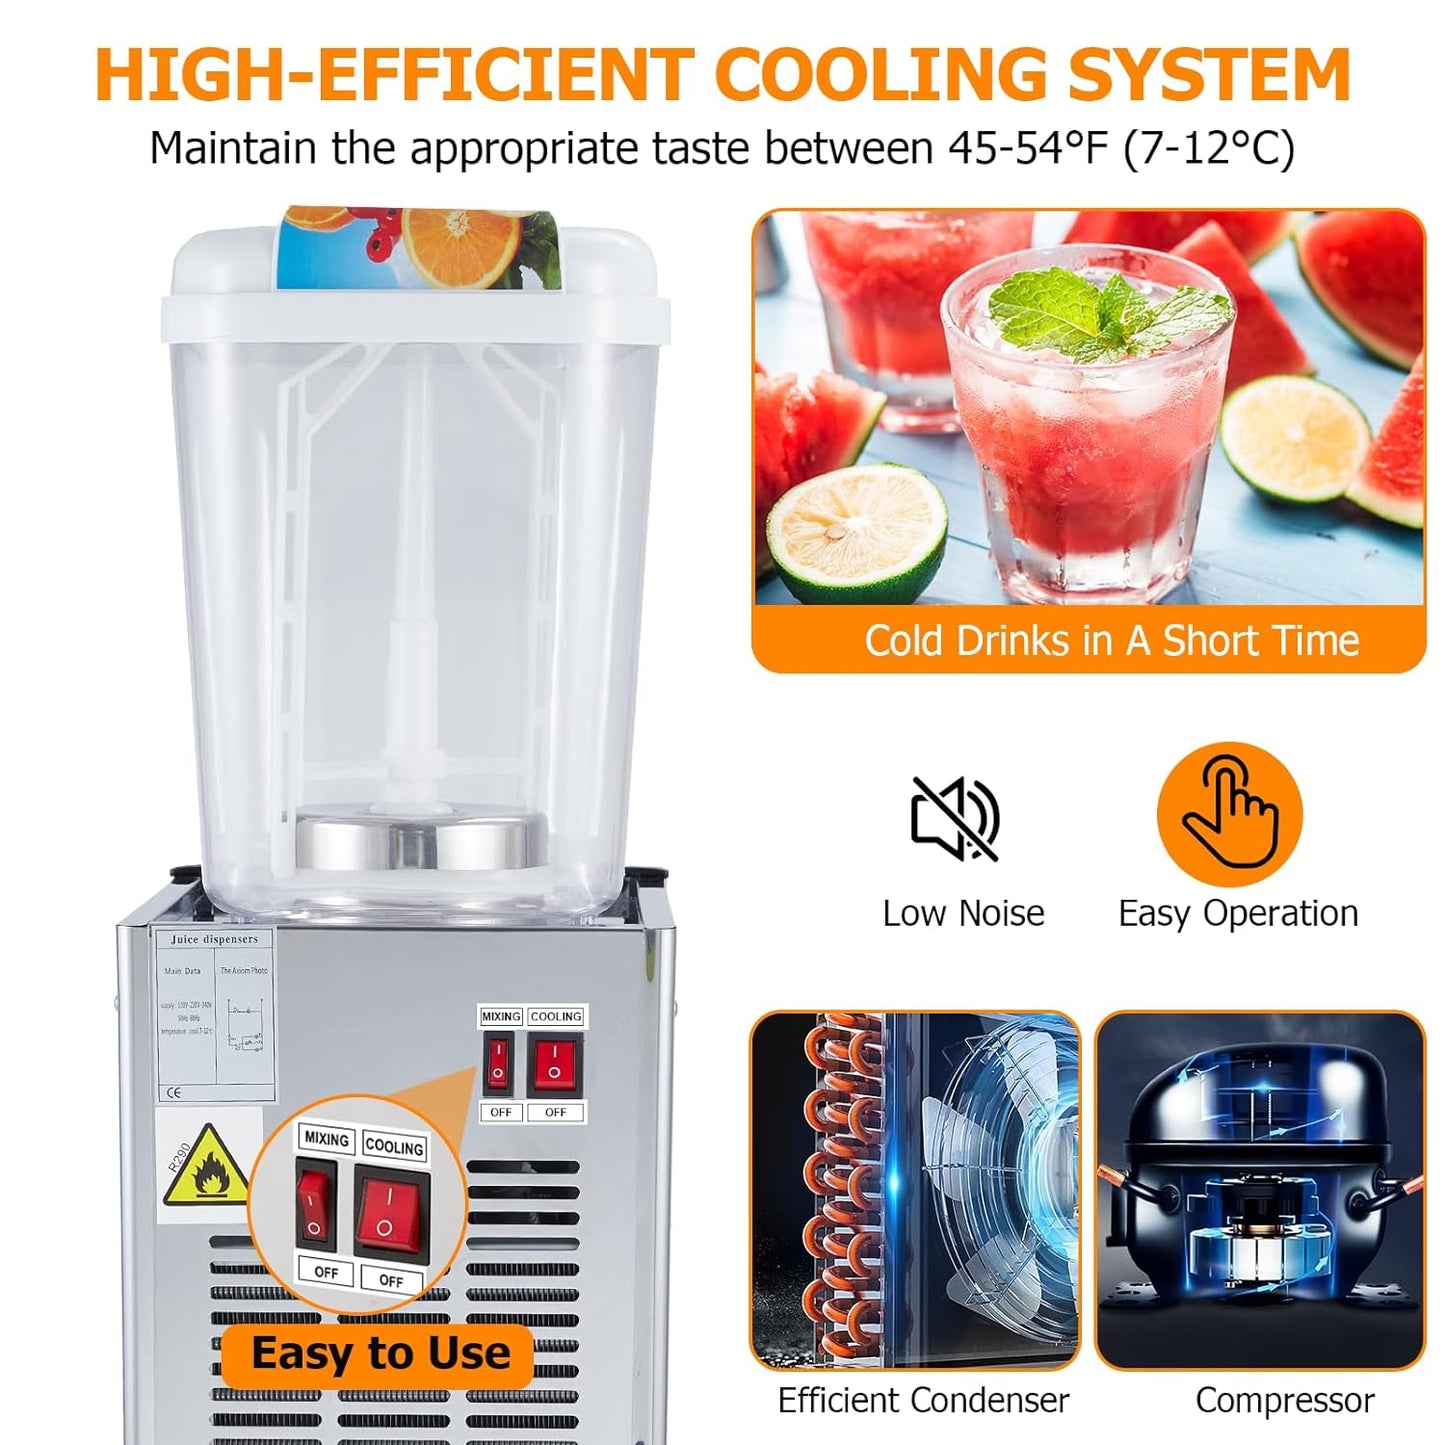 Commercial Beverage Dispenser,  1 Tanks 4.75 Gallon 18L Commercial Juice Dispenser, 18 Liter per Tank, 180W Stainless Steel Food Grade Ice Tea Drink Dispenser with Thermostat Controlle